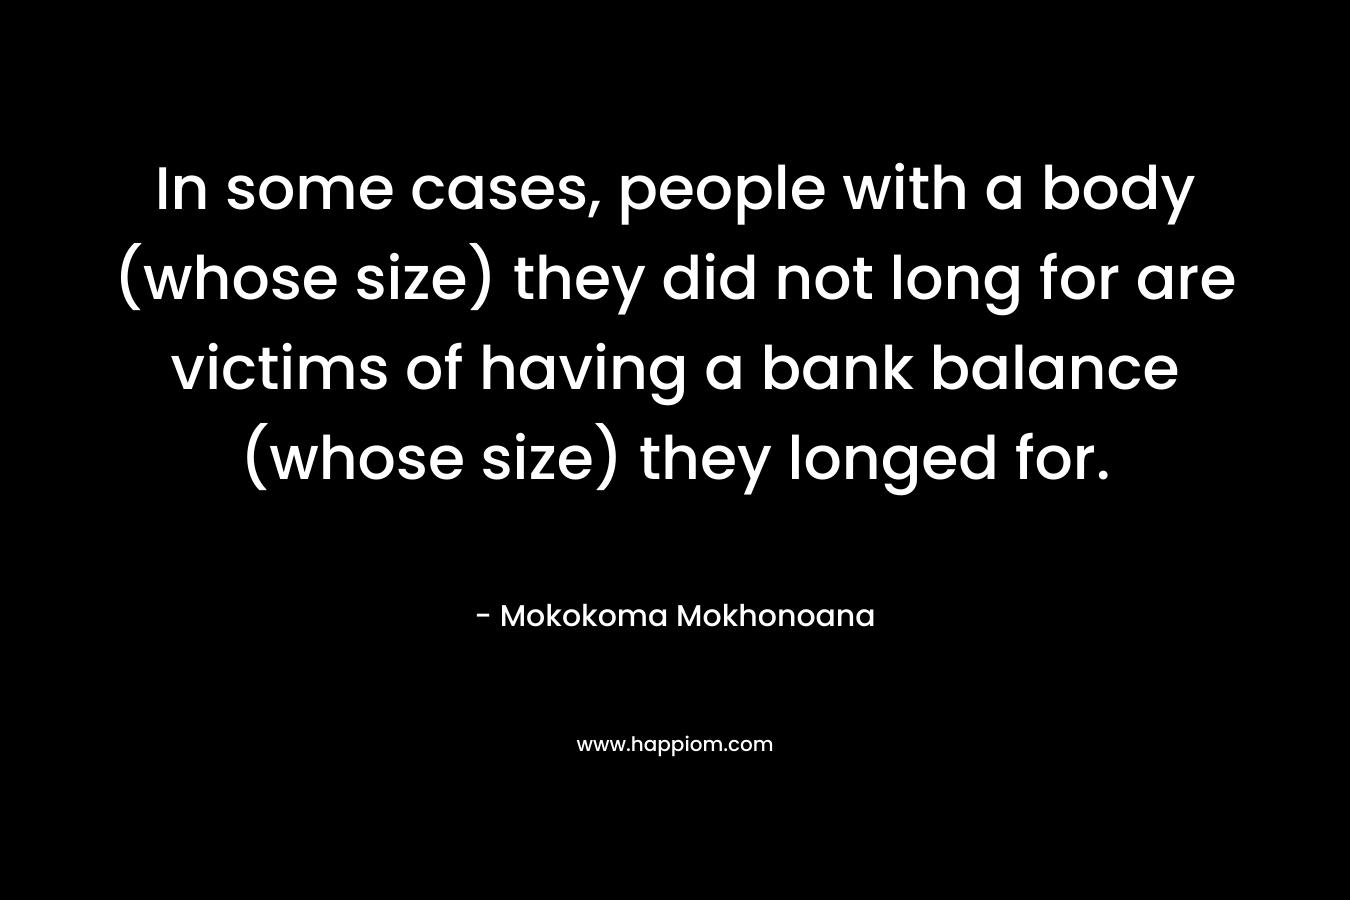 In some cases, people with a body (whose size) they did not long for are victims of having a bank balance (whose size) they longed for. – Mokokoma Mokhonoana